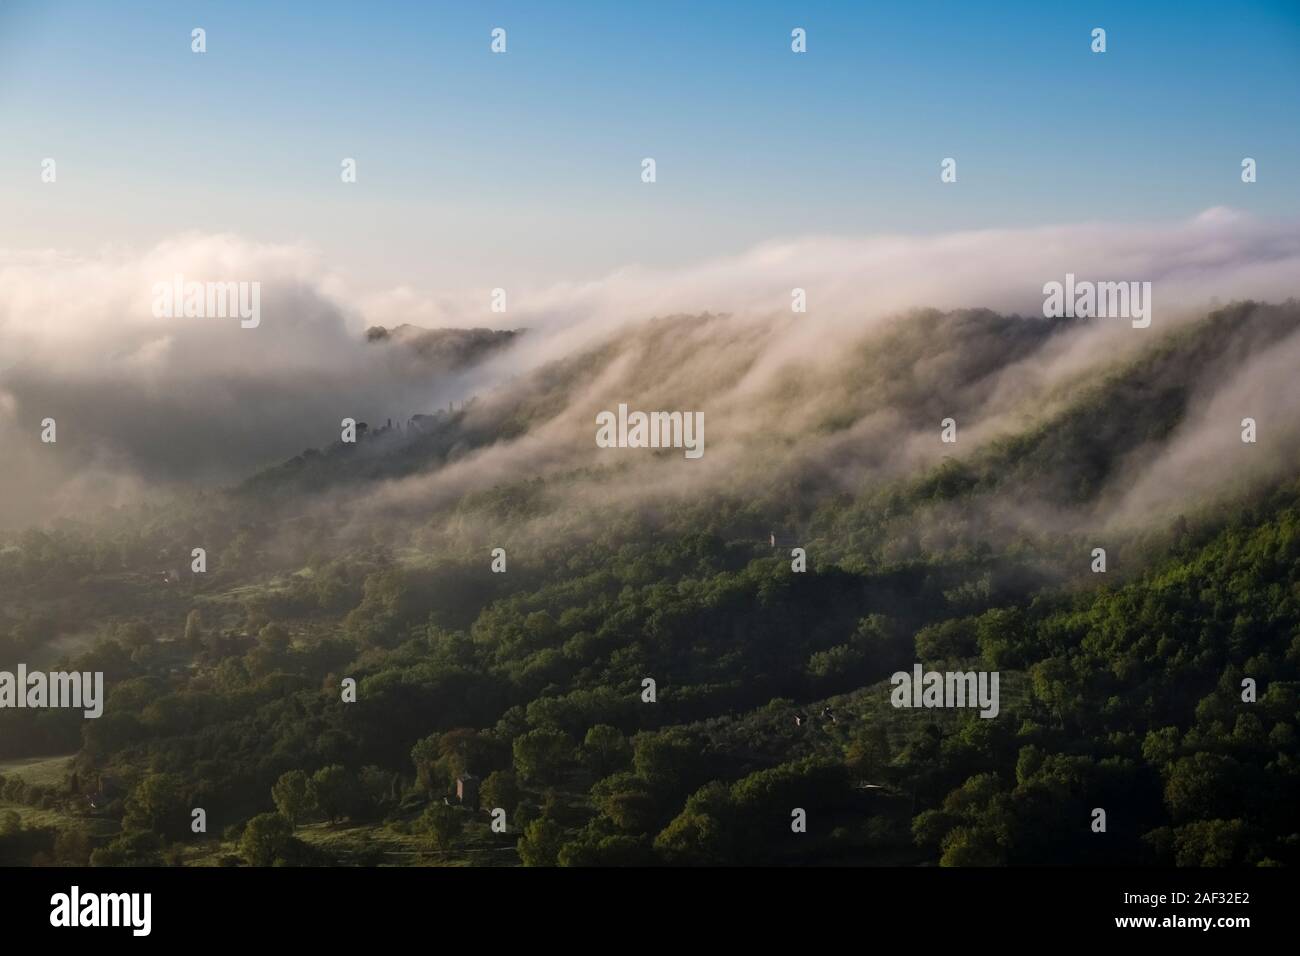 Wafts of mist flowing over a forested mountain ridge near Civita di Bagnoregio Stock Photo